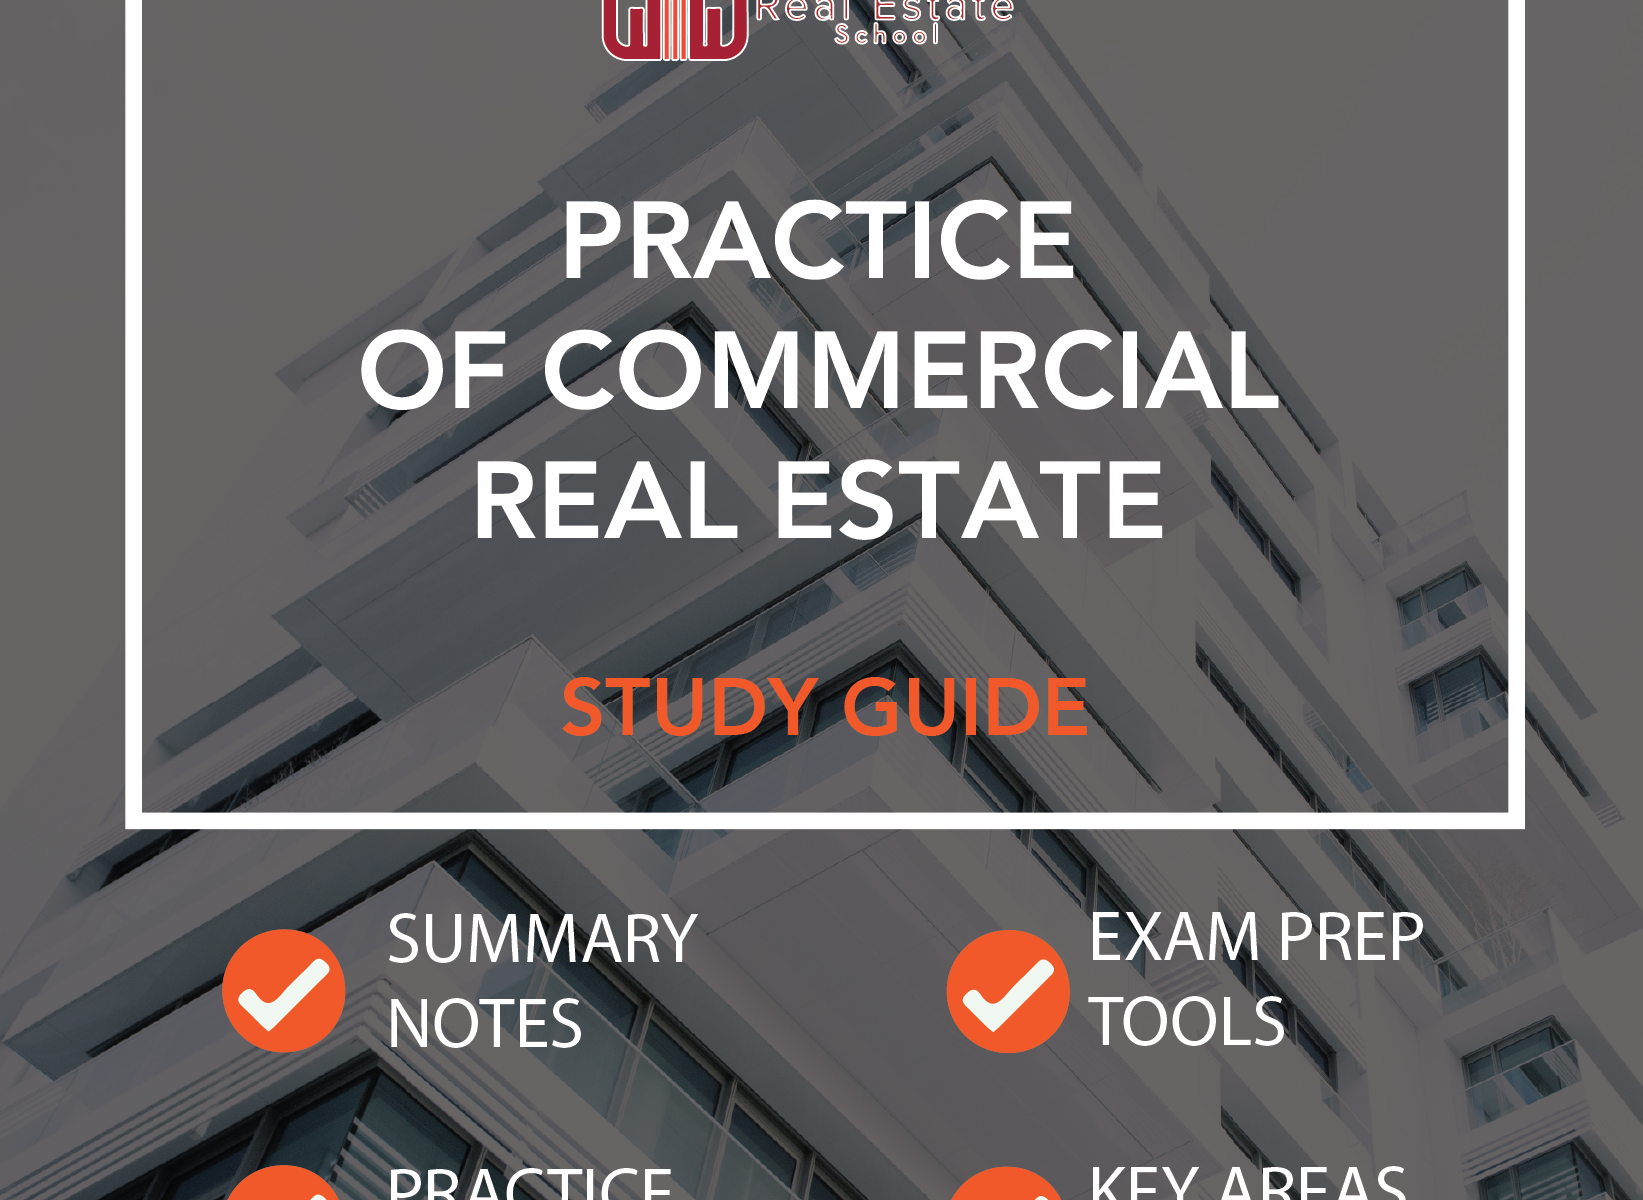 Raman Gakhal of Alberta Real Estate School in Edmonton is offering Practice of Commercial Real Estate - Study Guide.